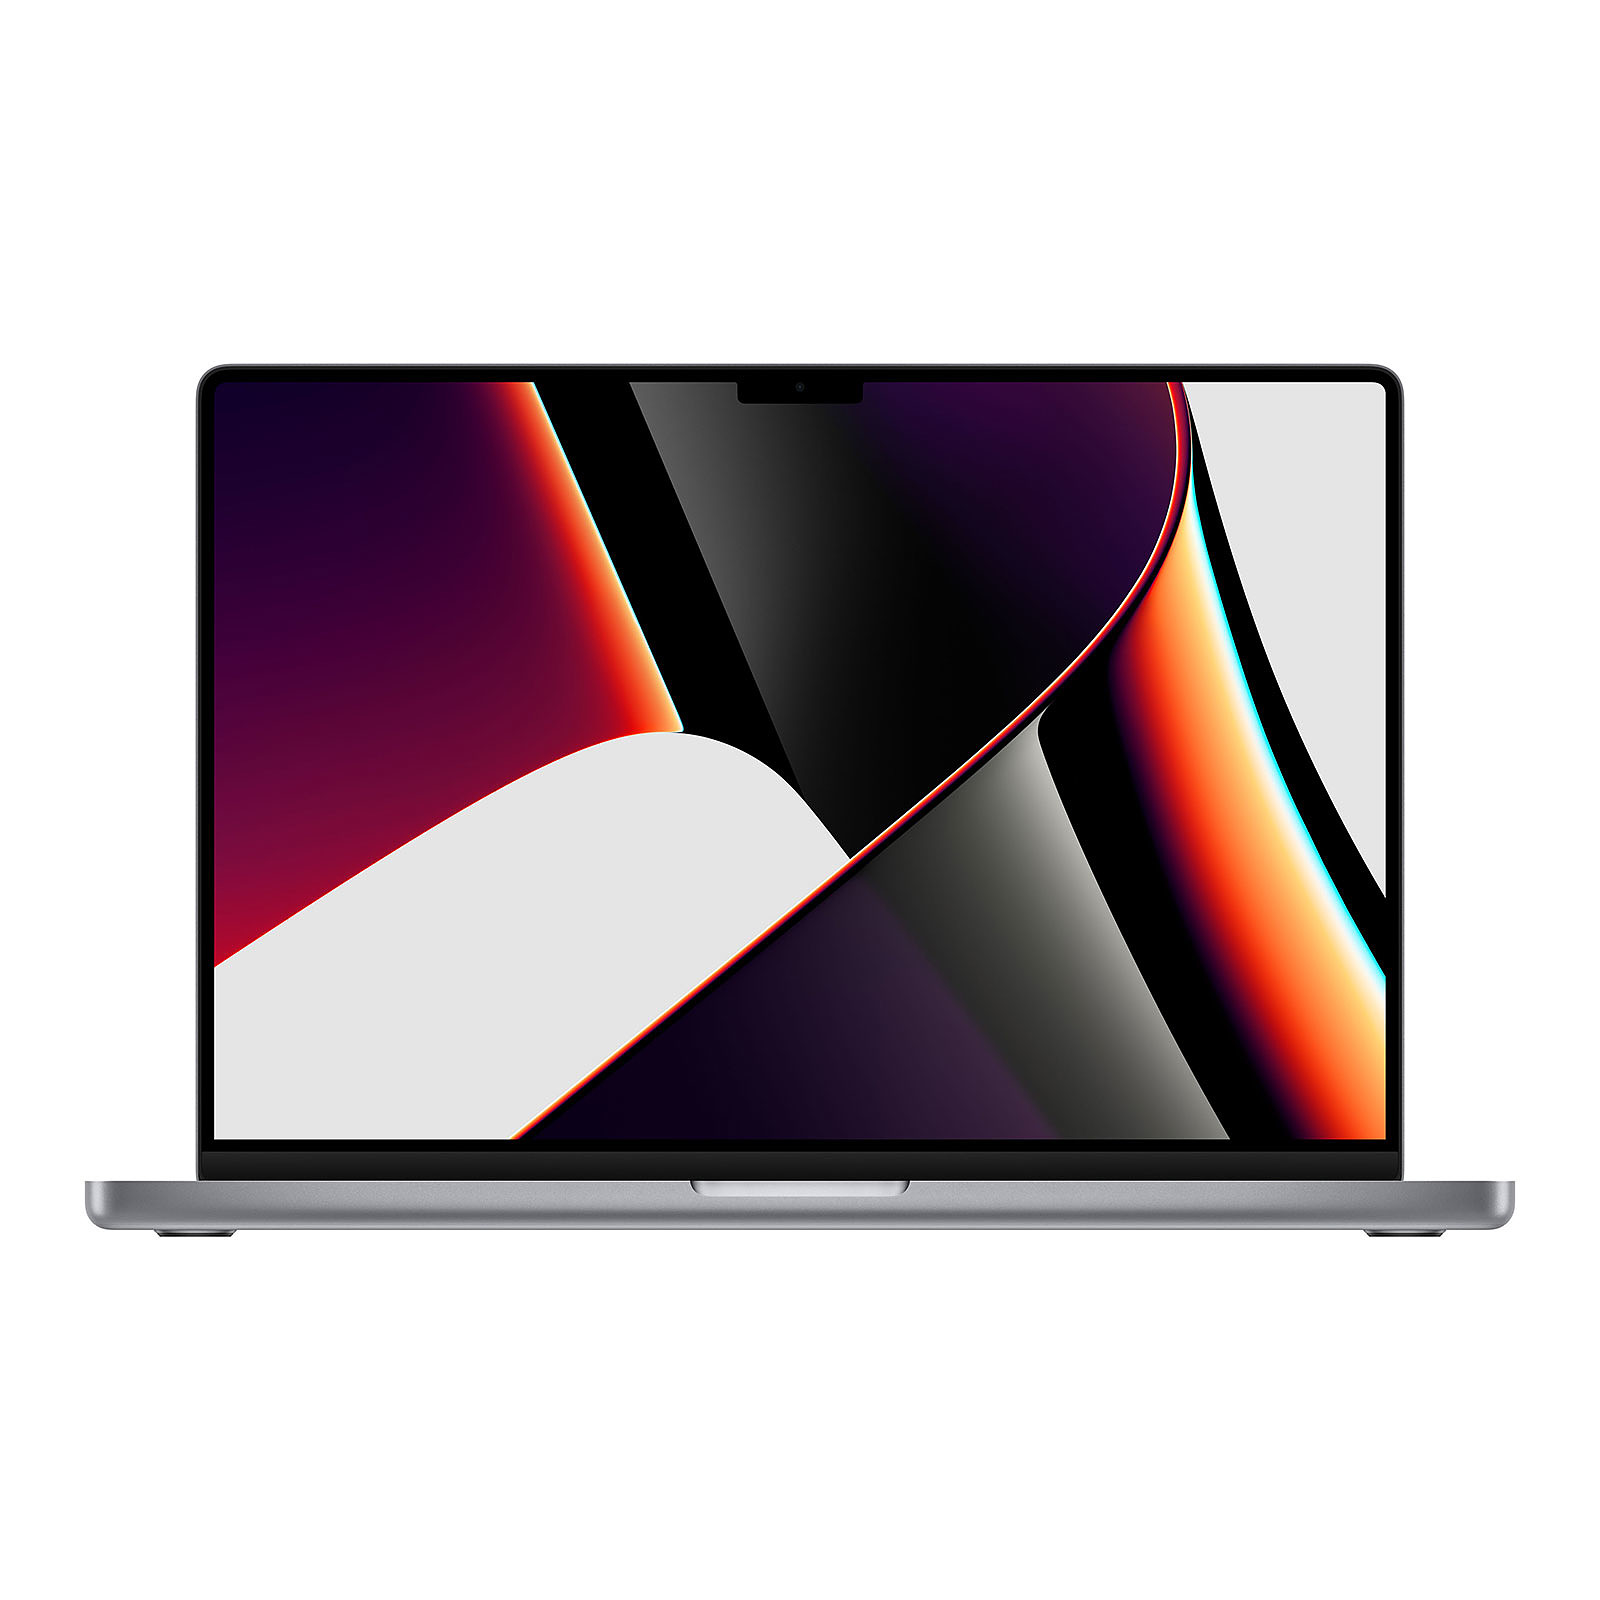 Apple MacBook Pro M1 Max (2021) 16" Gris sideral 64Go/4To (MK1A3FN/A-64GB-4TB) - MacBook Apple